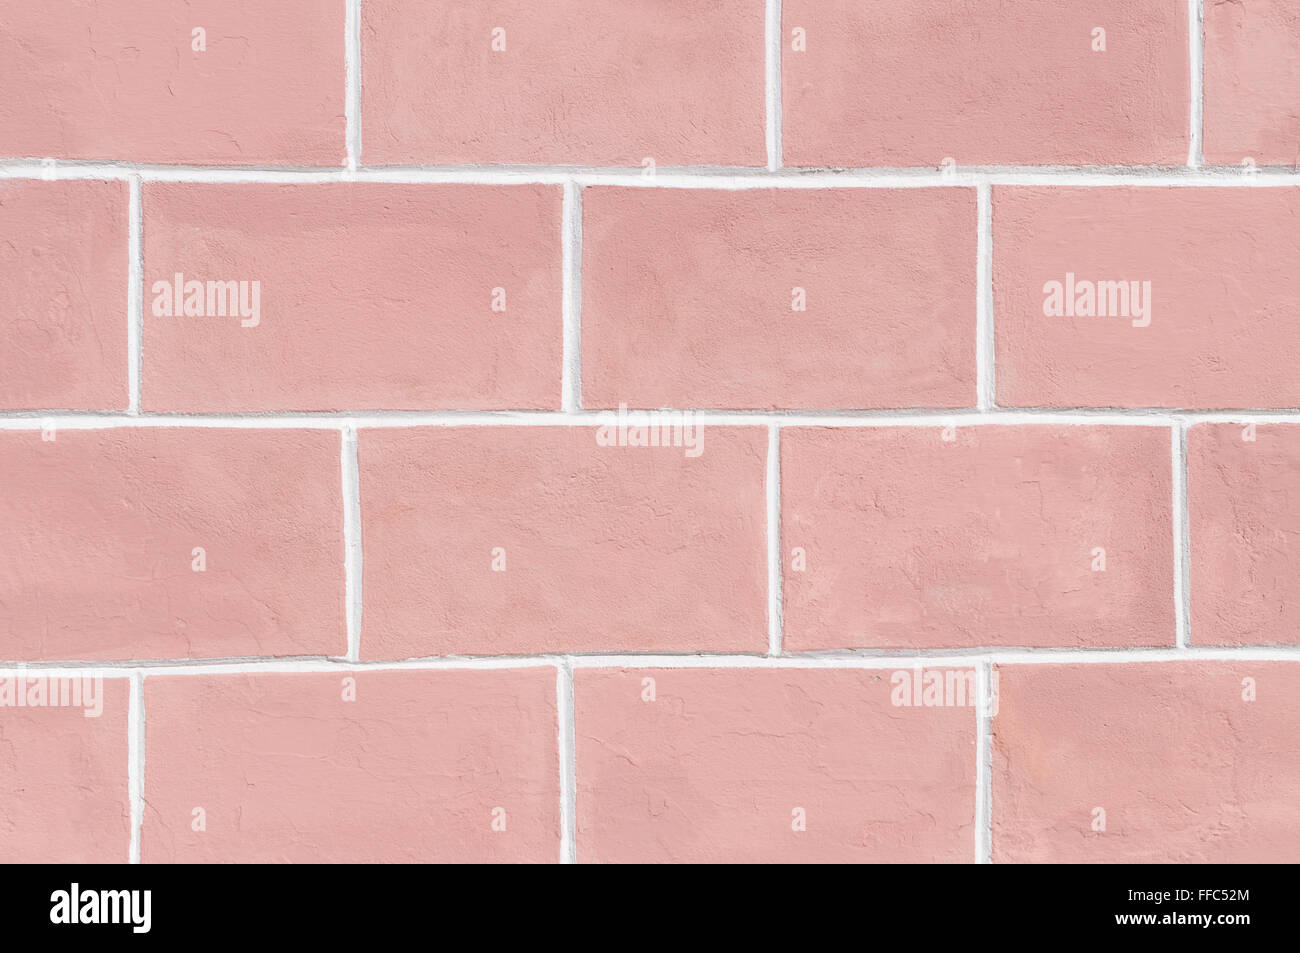 Retro style brickwork pink color wall background Stock Photo